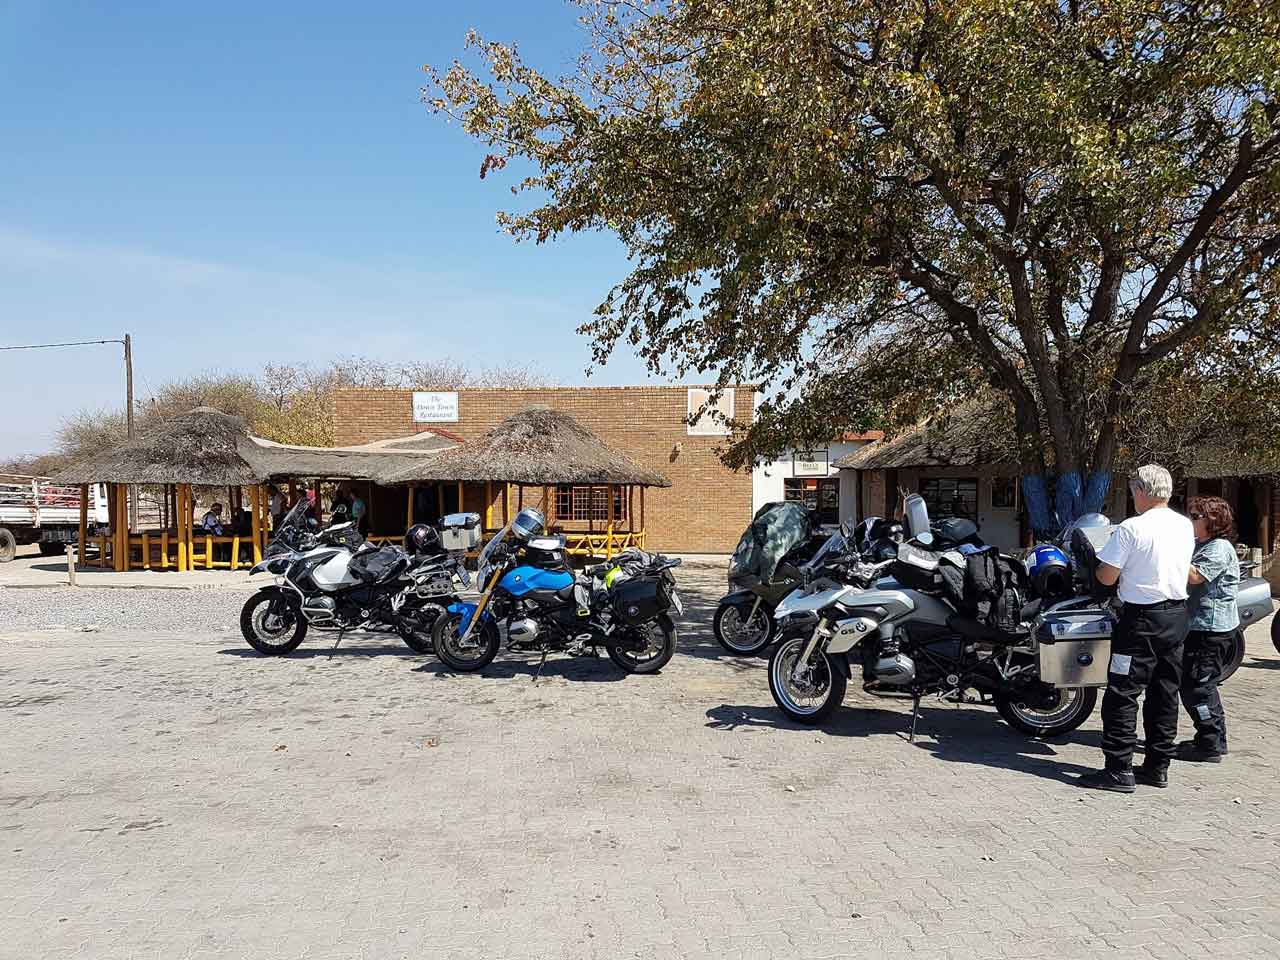 Day 5 - Call of the Wild Motorcycle Tour